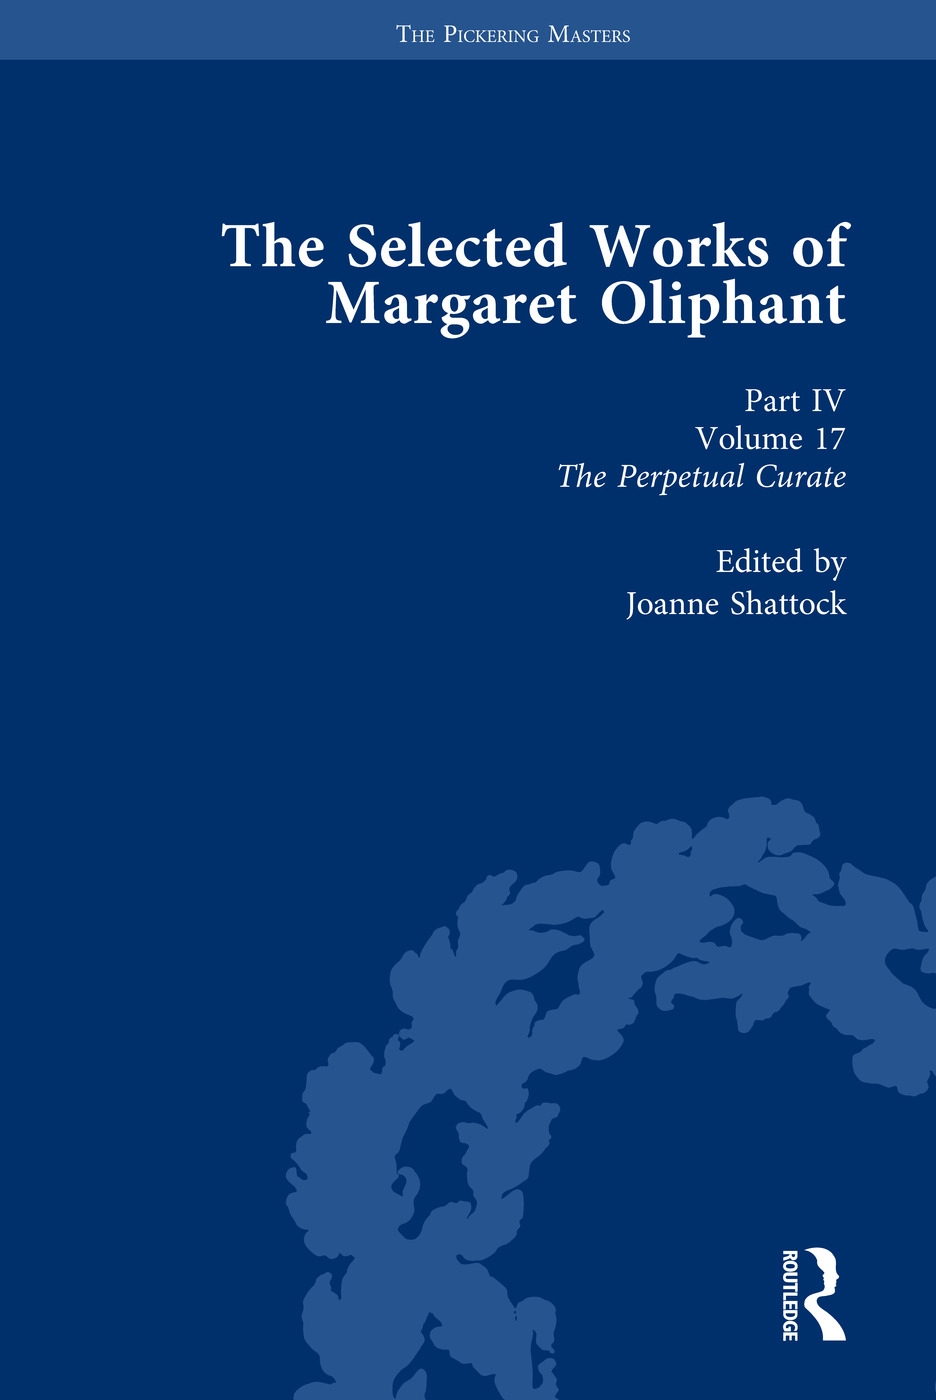 The Selected Works of Margaret Oliphant, Part IV Volume 17: The Perpetual Curate